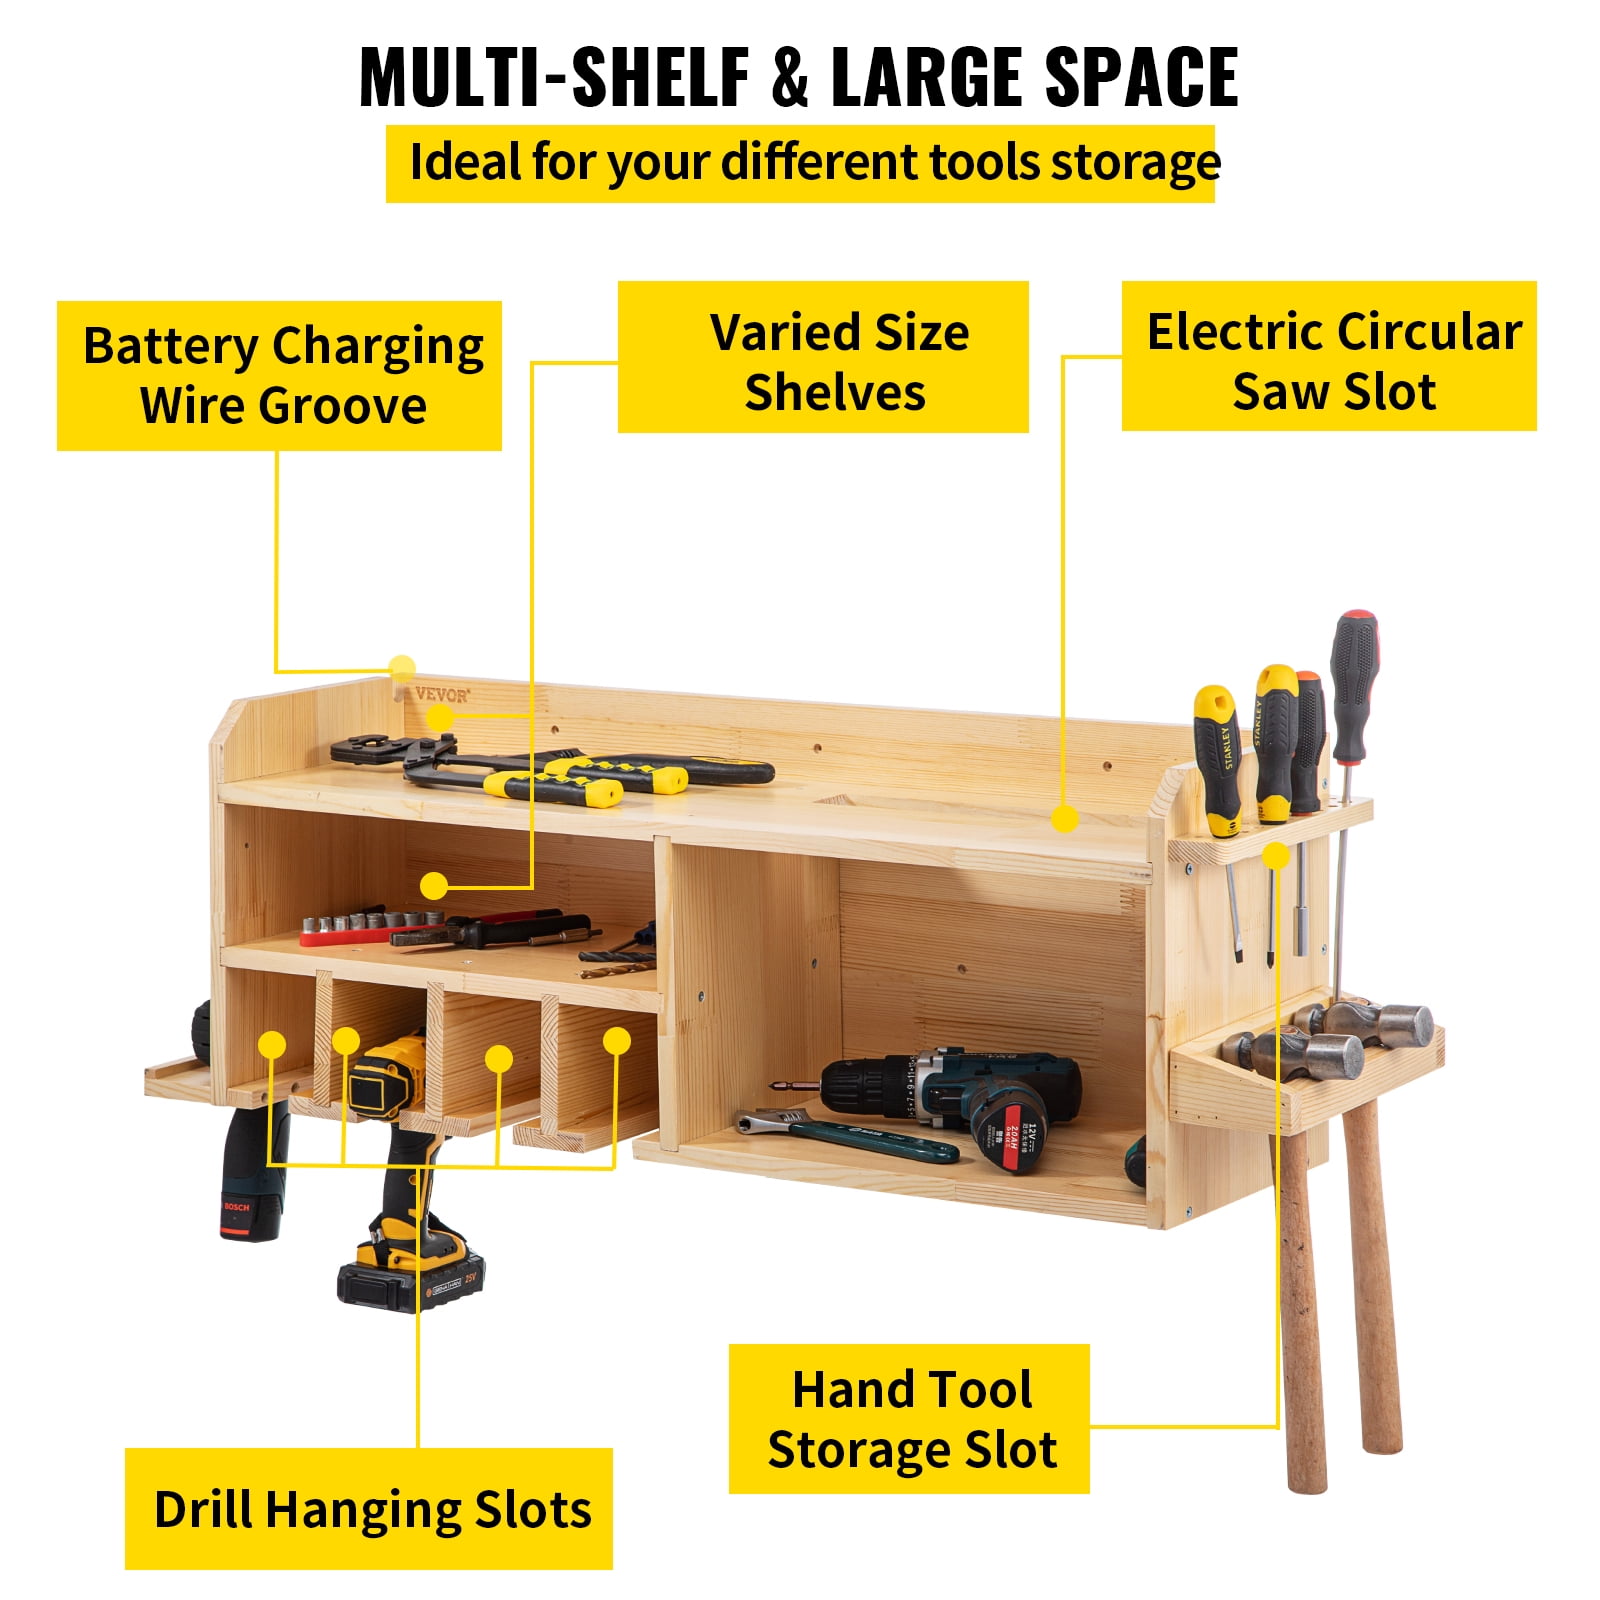 VEVOR Power Tool Organizer, 4 Slot, 3 Layers, Cordless Drill Holder Wall Mount, Battery Charging Station Storage Rack, Multi-function Garage